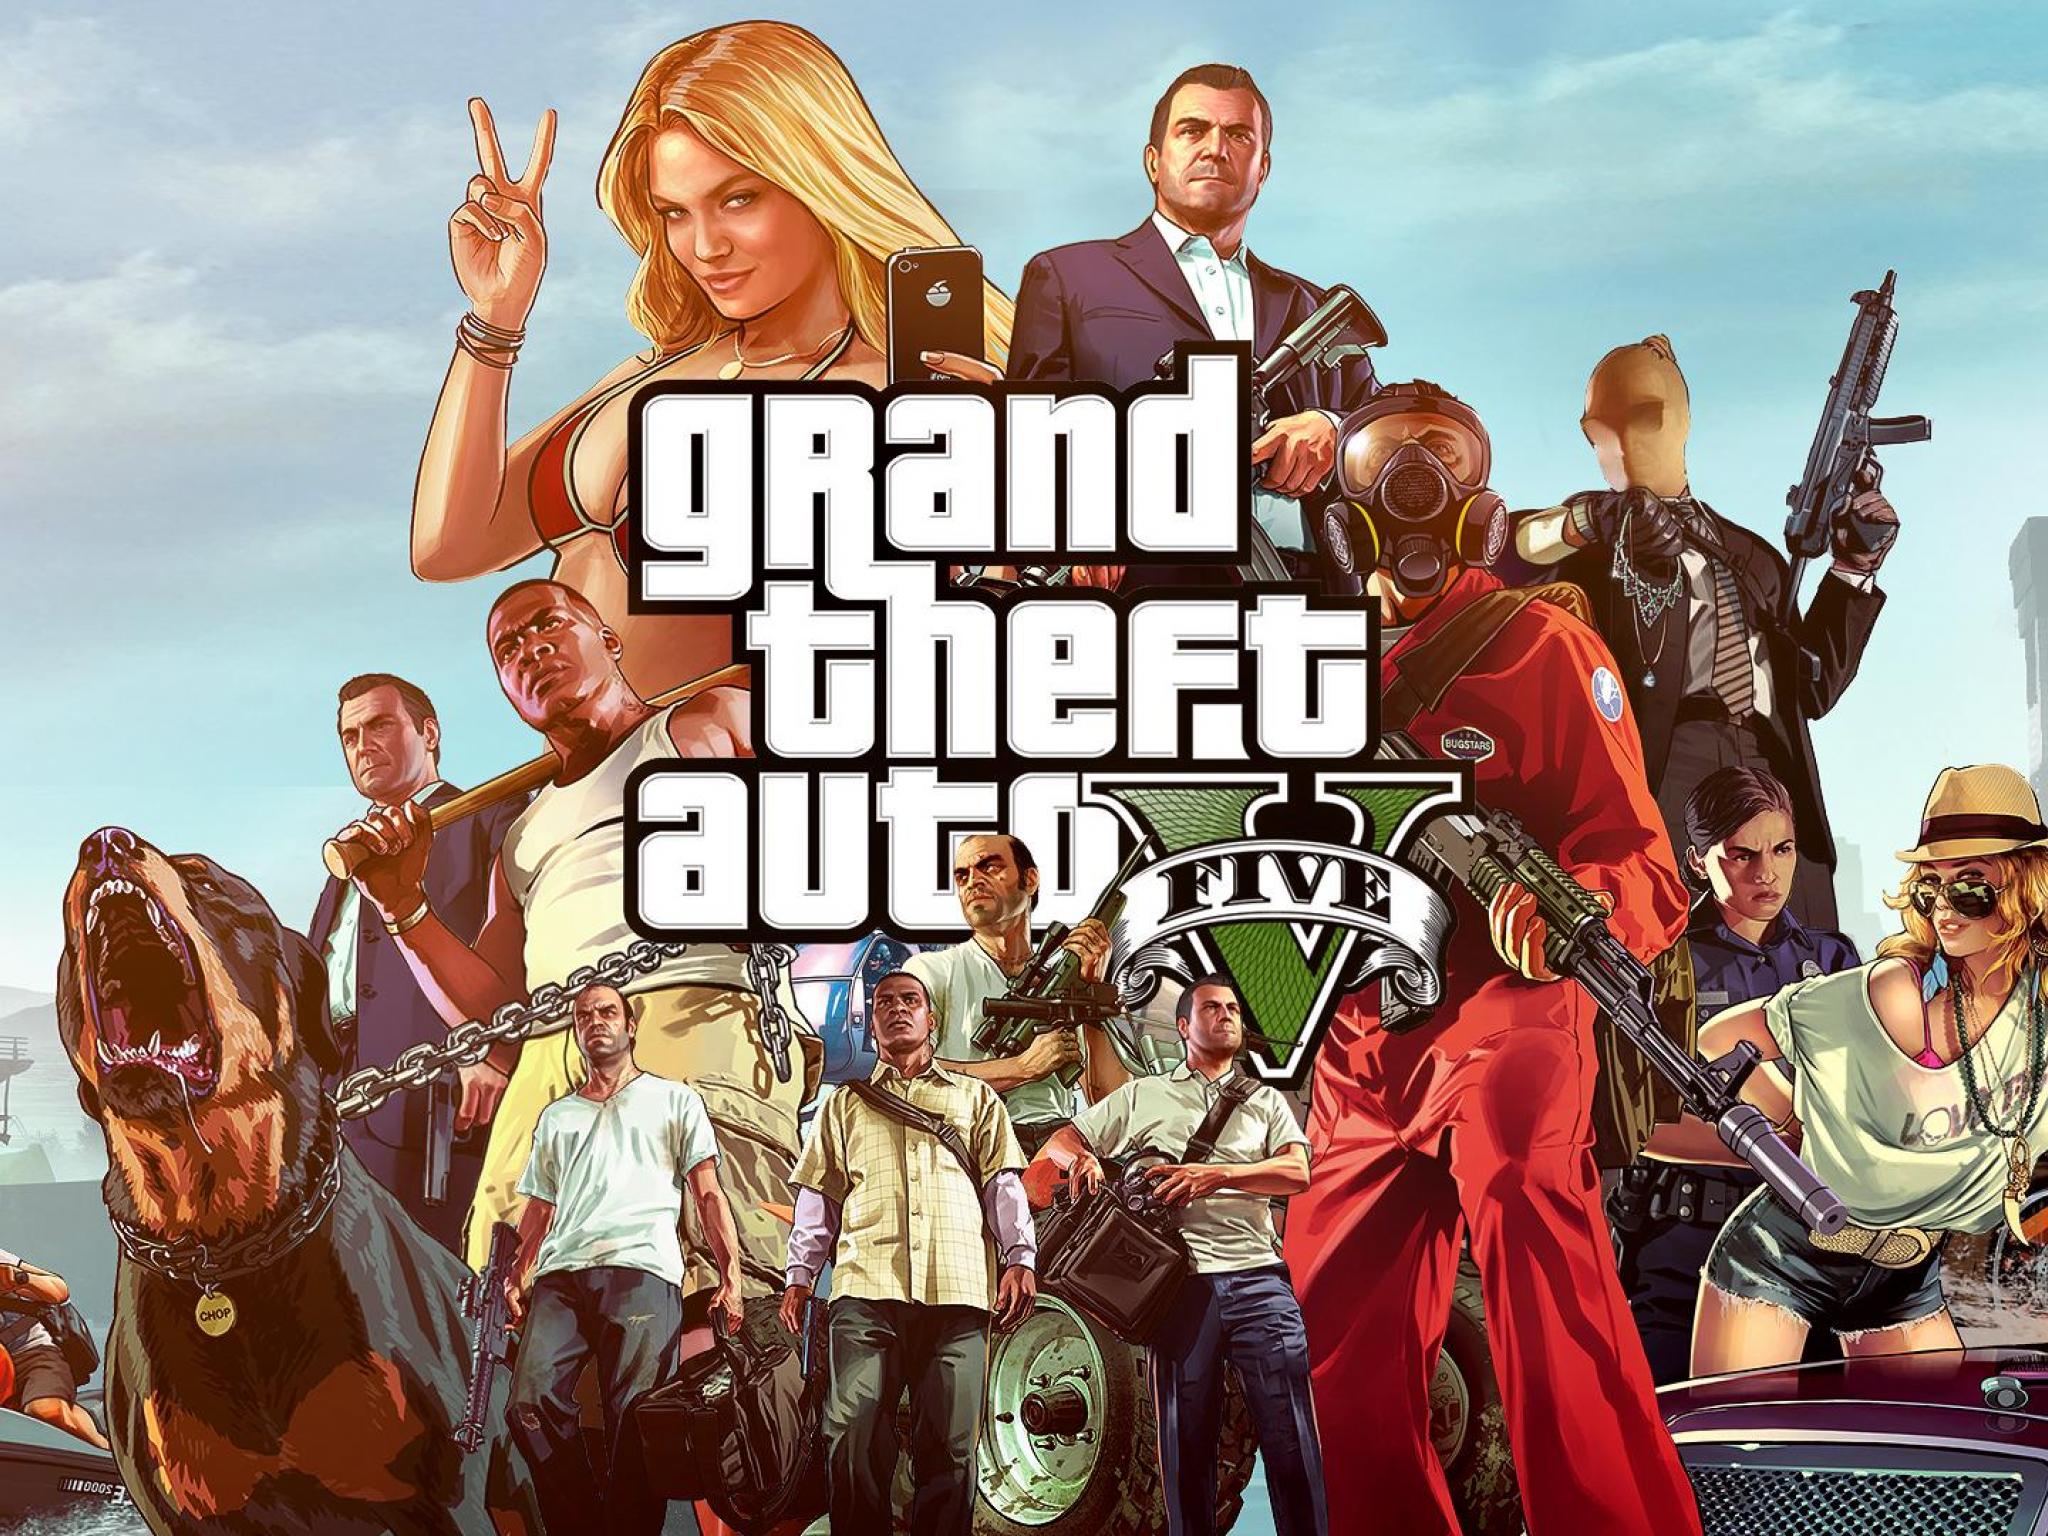 Grand theft auto 5 hd wallpapers